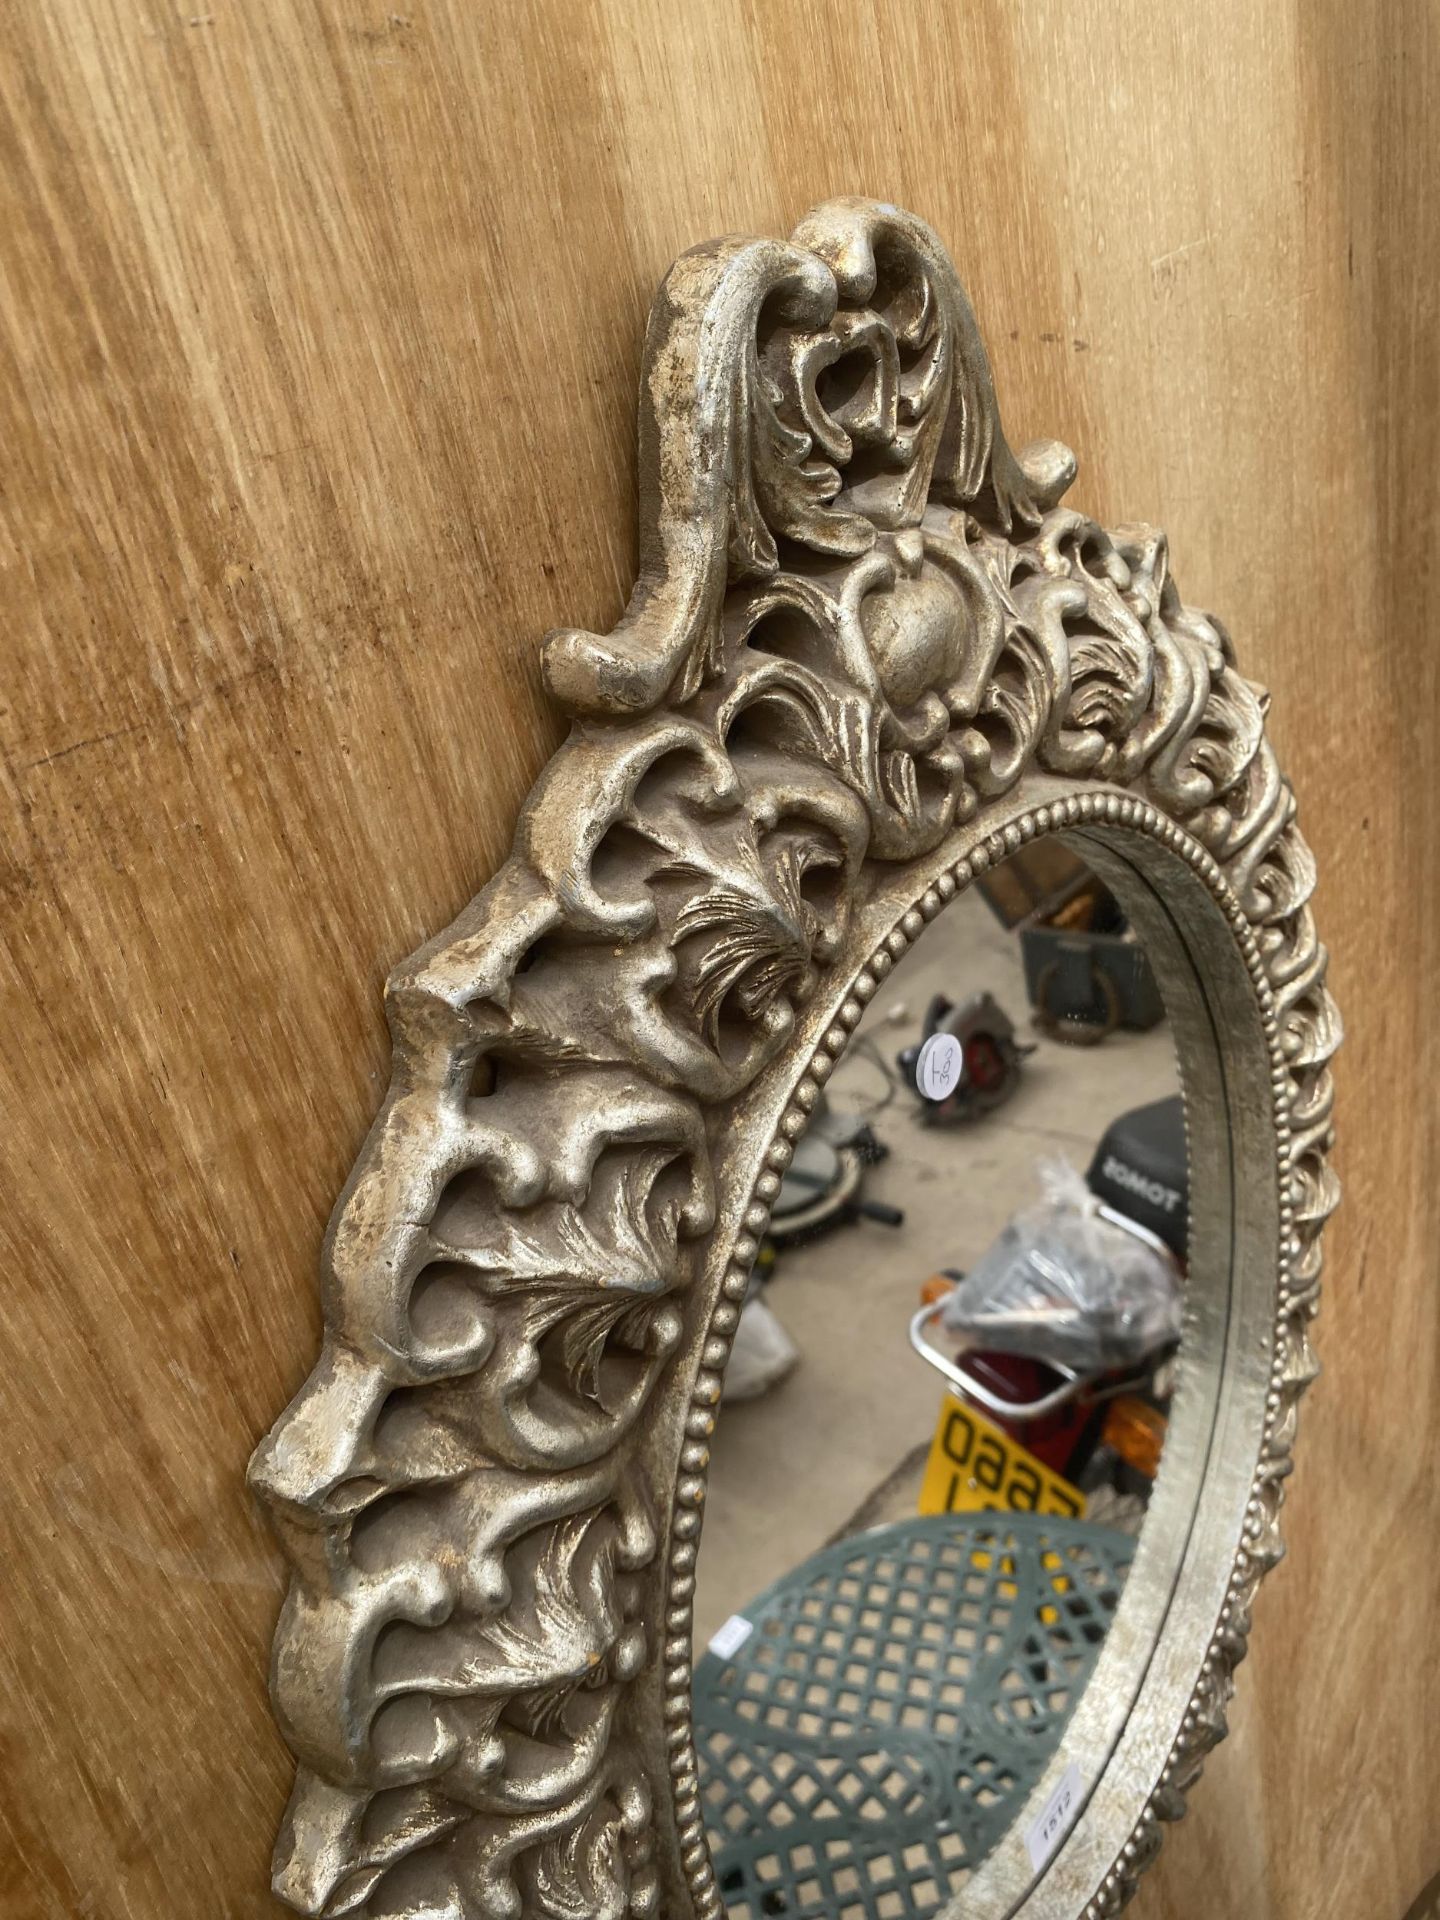 A DECORATIVE SILVER GILT FRAMED WALL MIRROR - Image 2 of 3